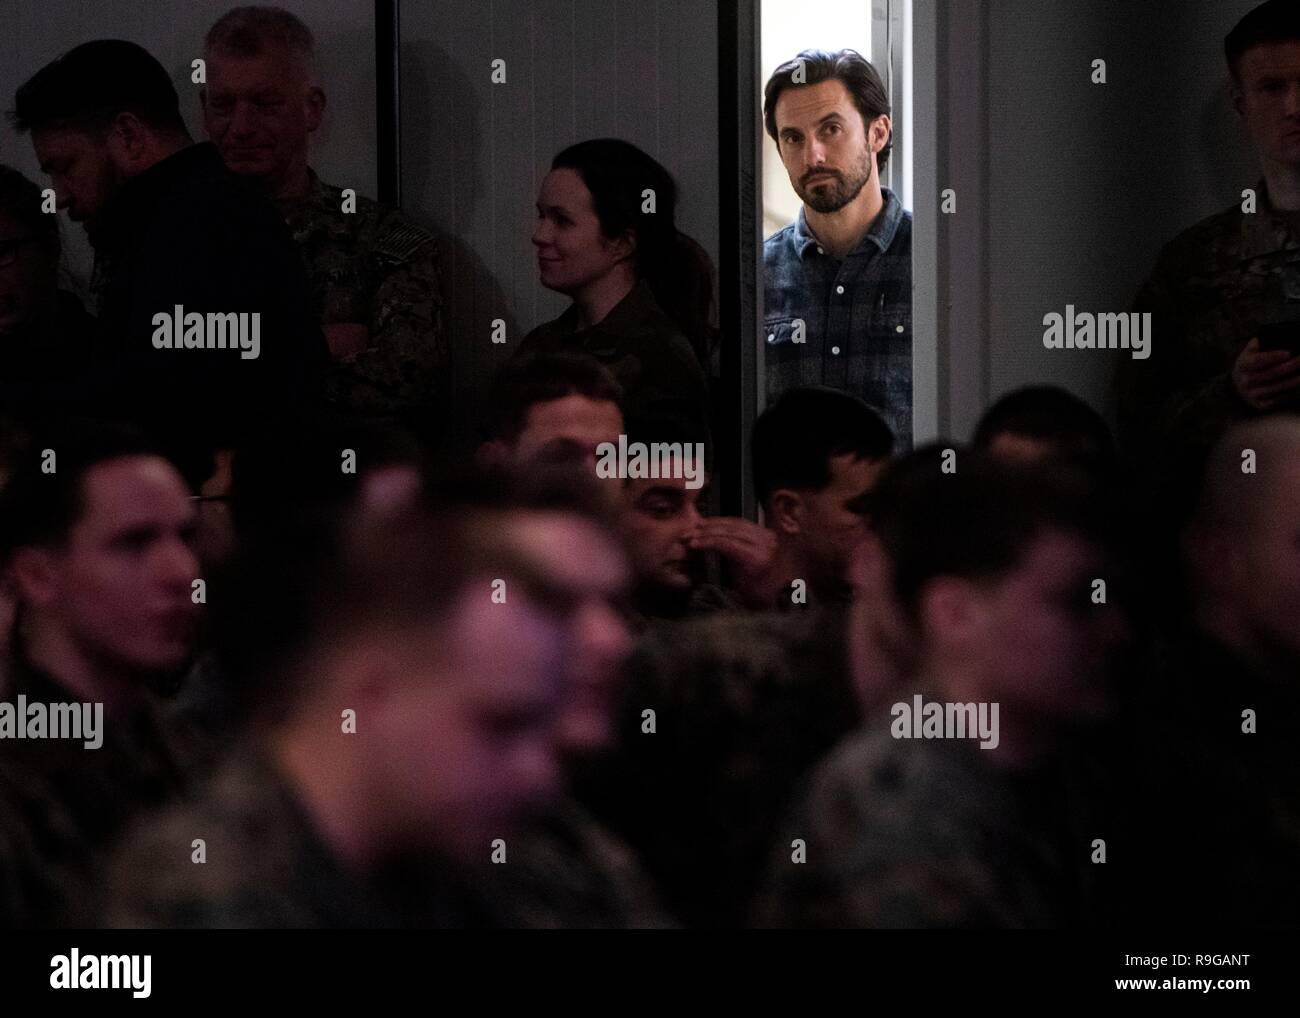 Manama, Bahrain. 21st Dec, 2018. Actor Milo Ventimiglia watches the Joint Chiefs USO Christmas Show for deployed service members December 21, 2018 in Vaernes, Norway. This year’s entertainers include actors Milo Ventimiglia, Wilmer Valderrama, DJ J Dayz, Fittest Man on Earth Matt Fraser, 3-time Olympic Gold Medalist Shaun White, Country Music Singer Kellie Pickler, and comedian Jessiemae Peluso. Credit: Planetpix/Alamy Live News Stock Photo